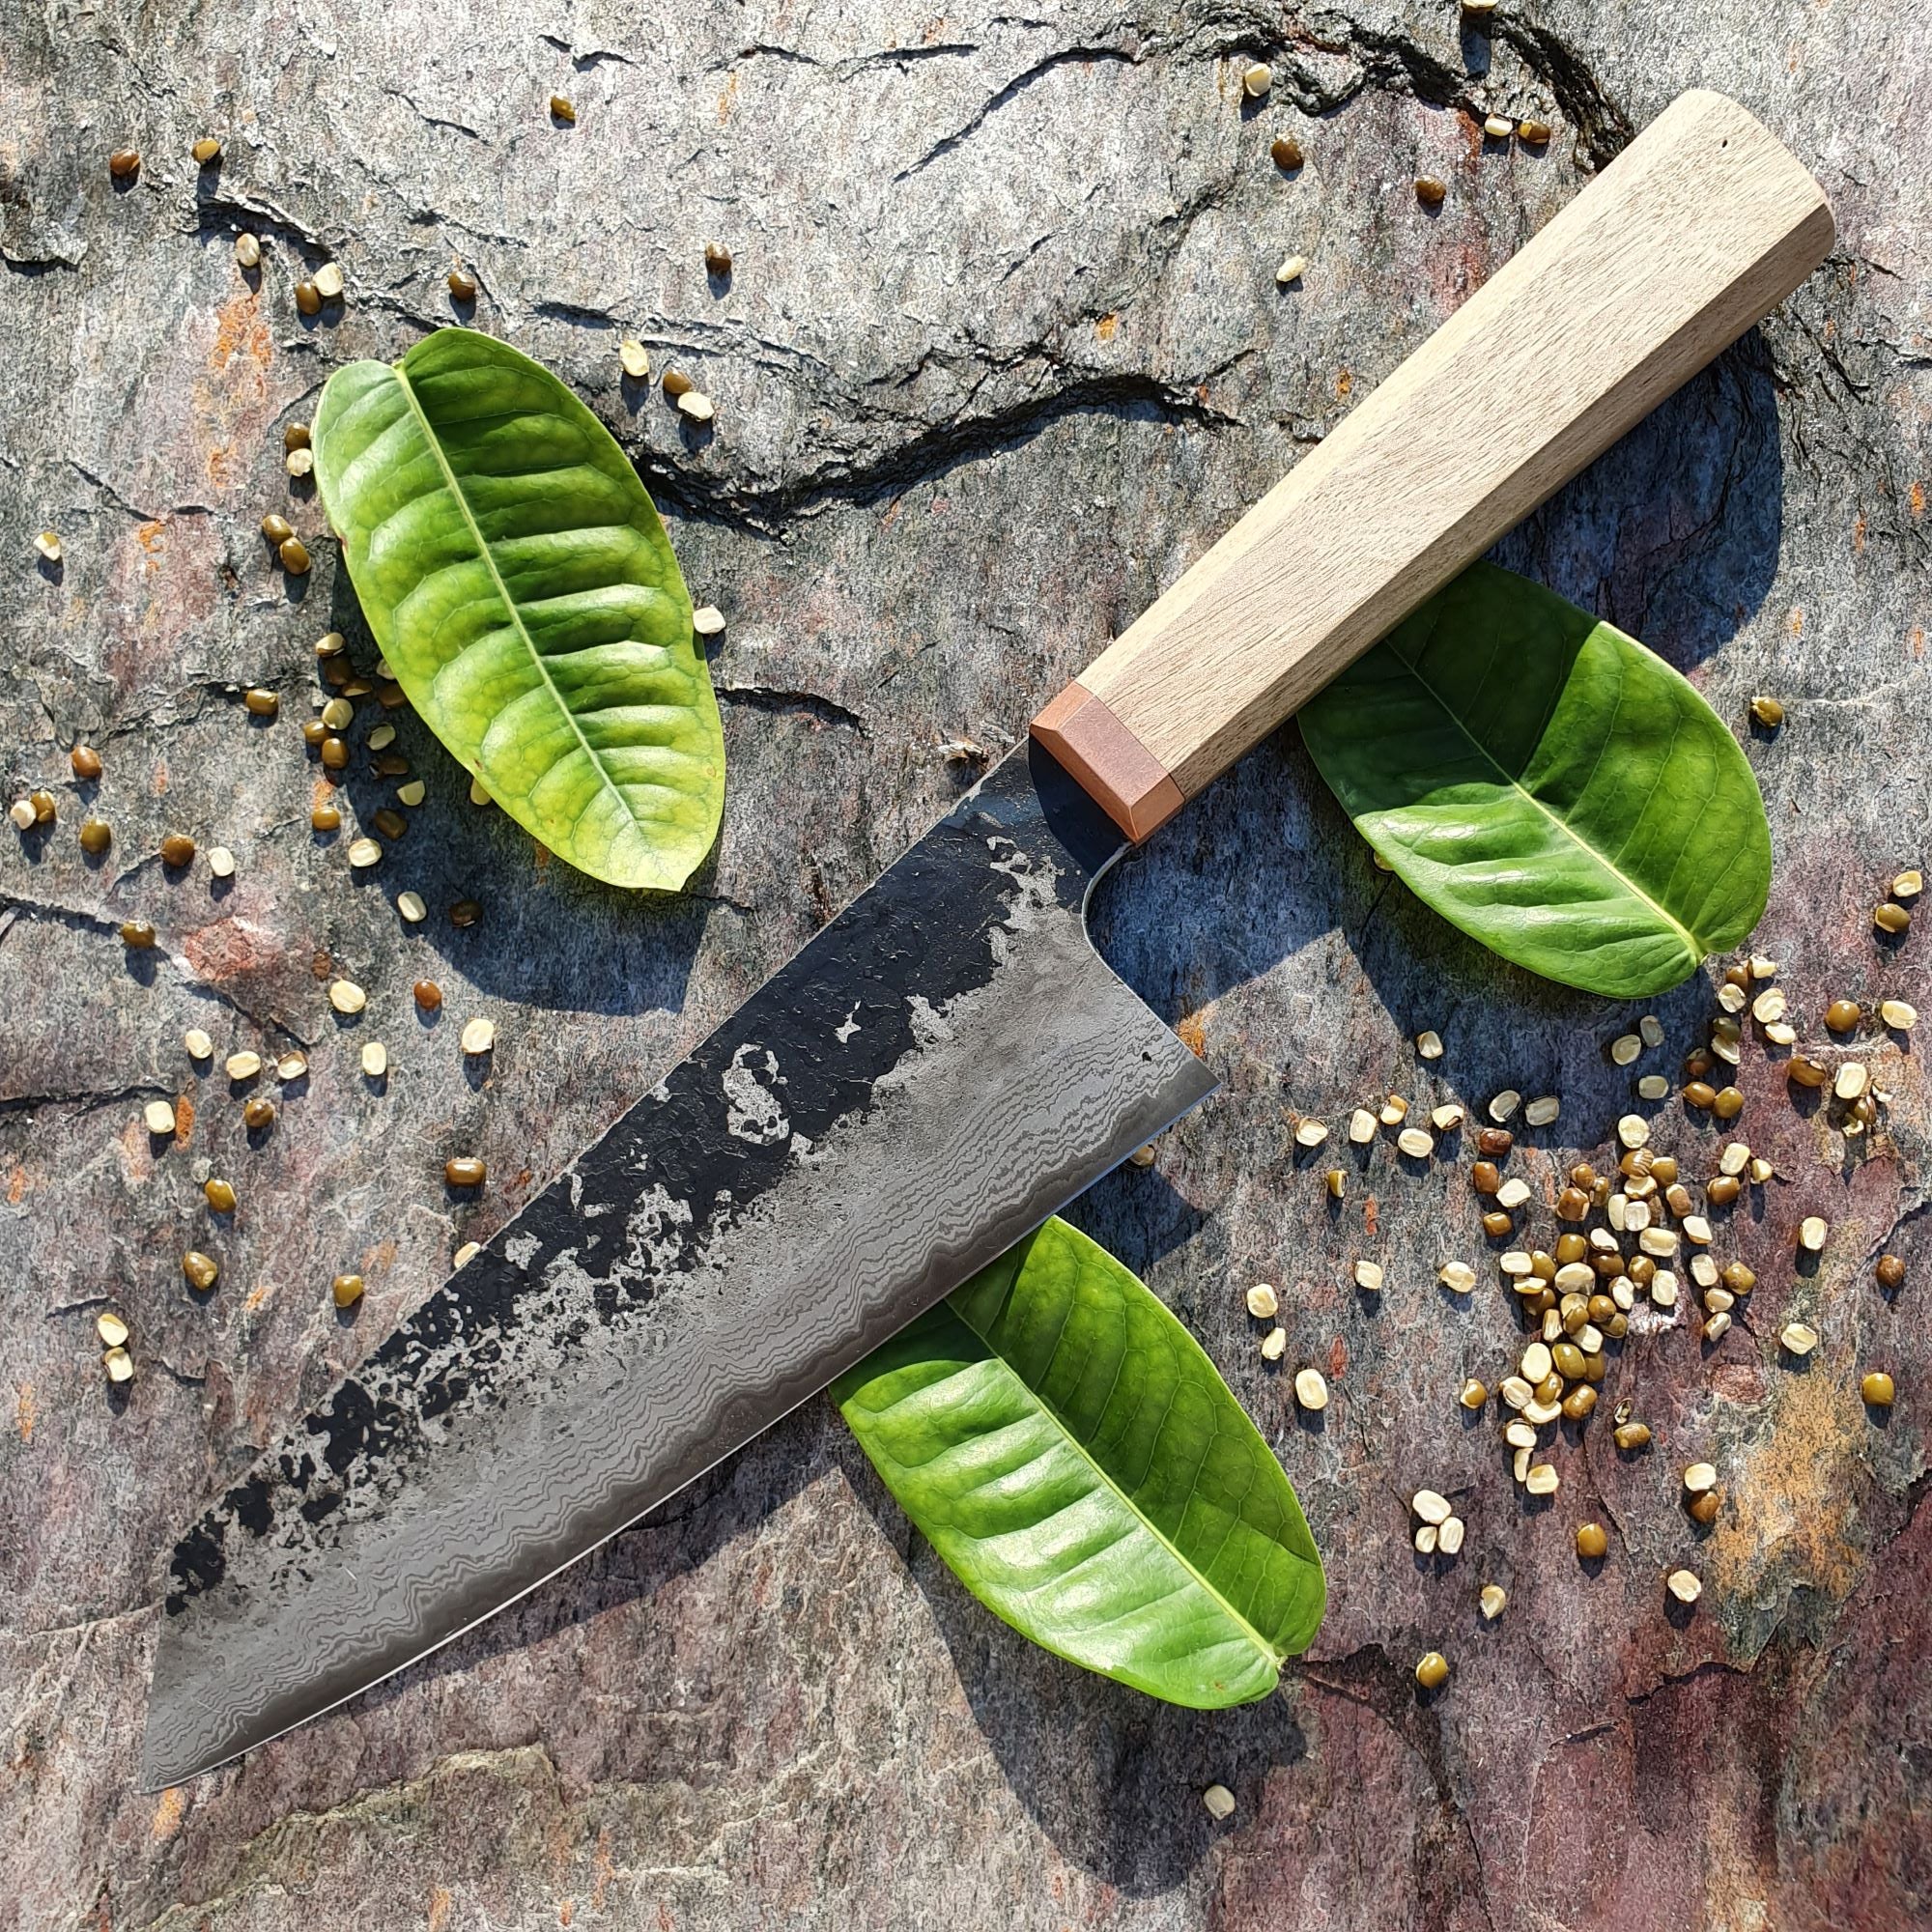 Santoku – The Forge (a division of Star Food General Trading LLC)